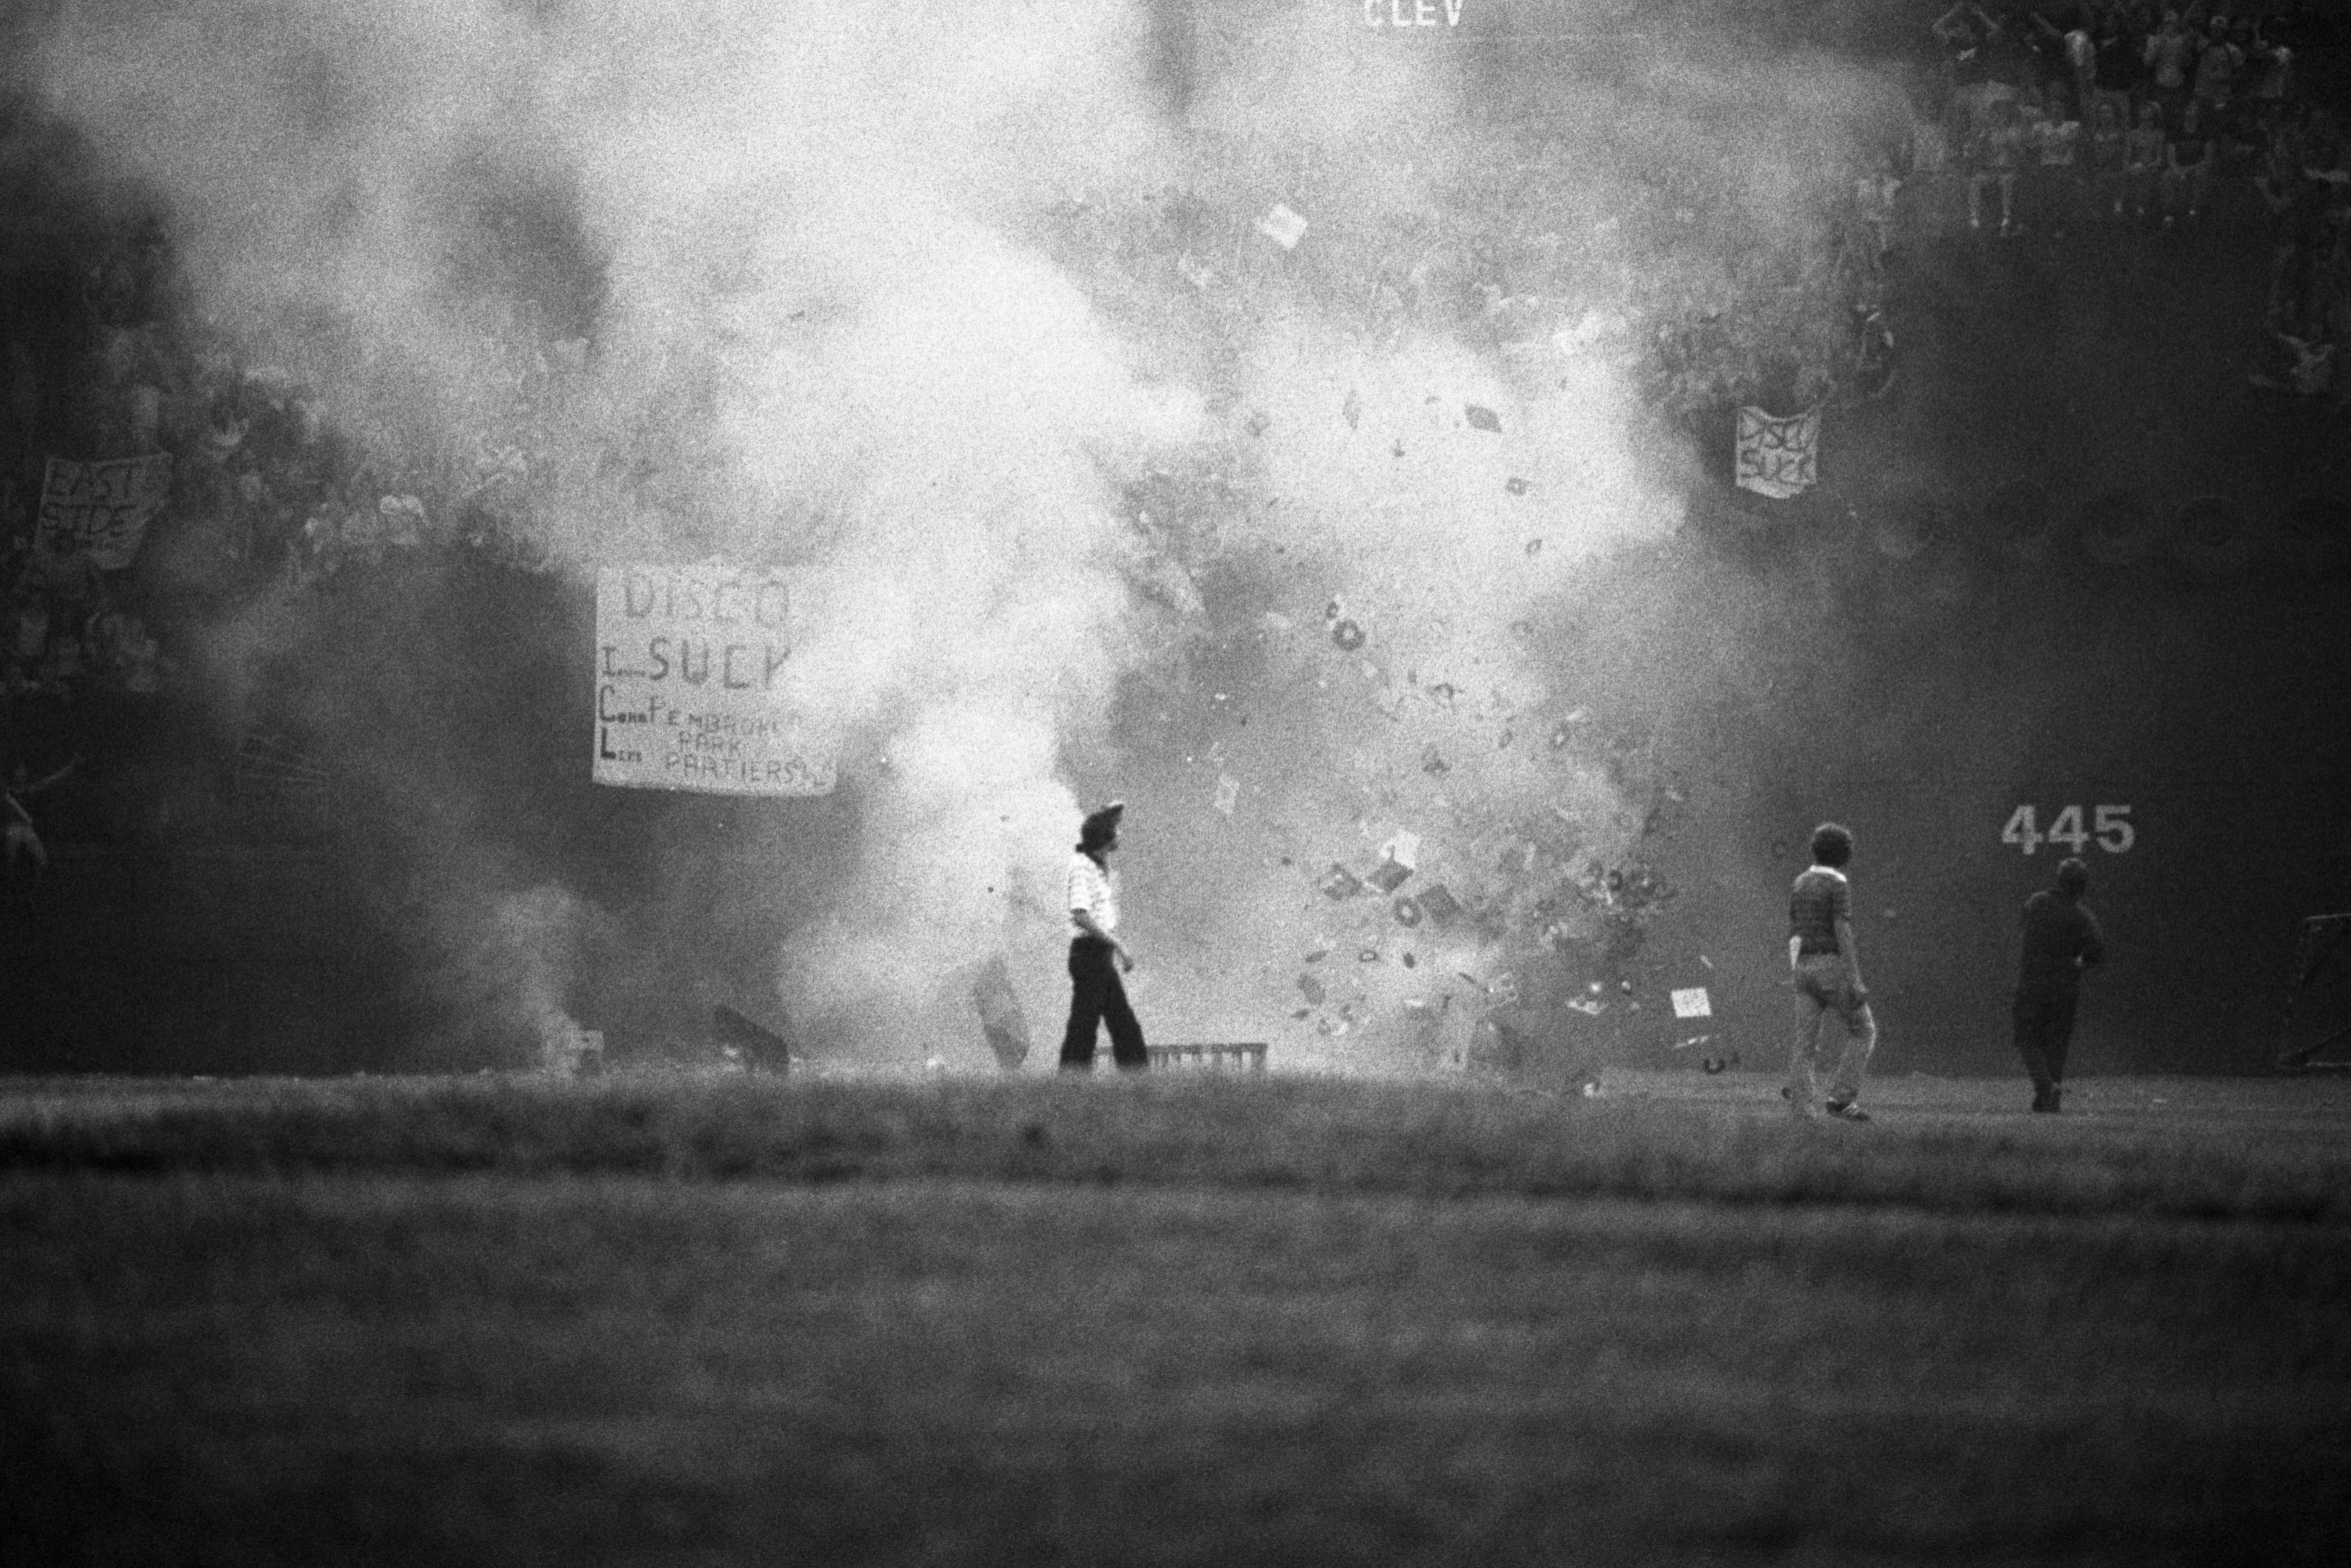 How Disco Demolition Night demonstrates racist reaction to disco